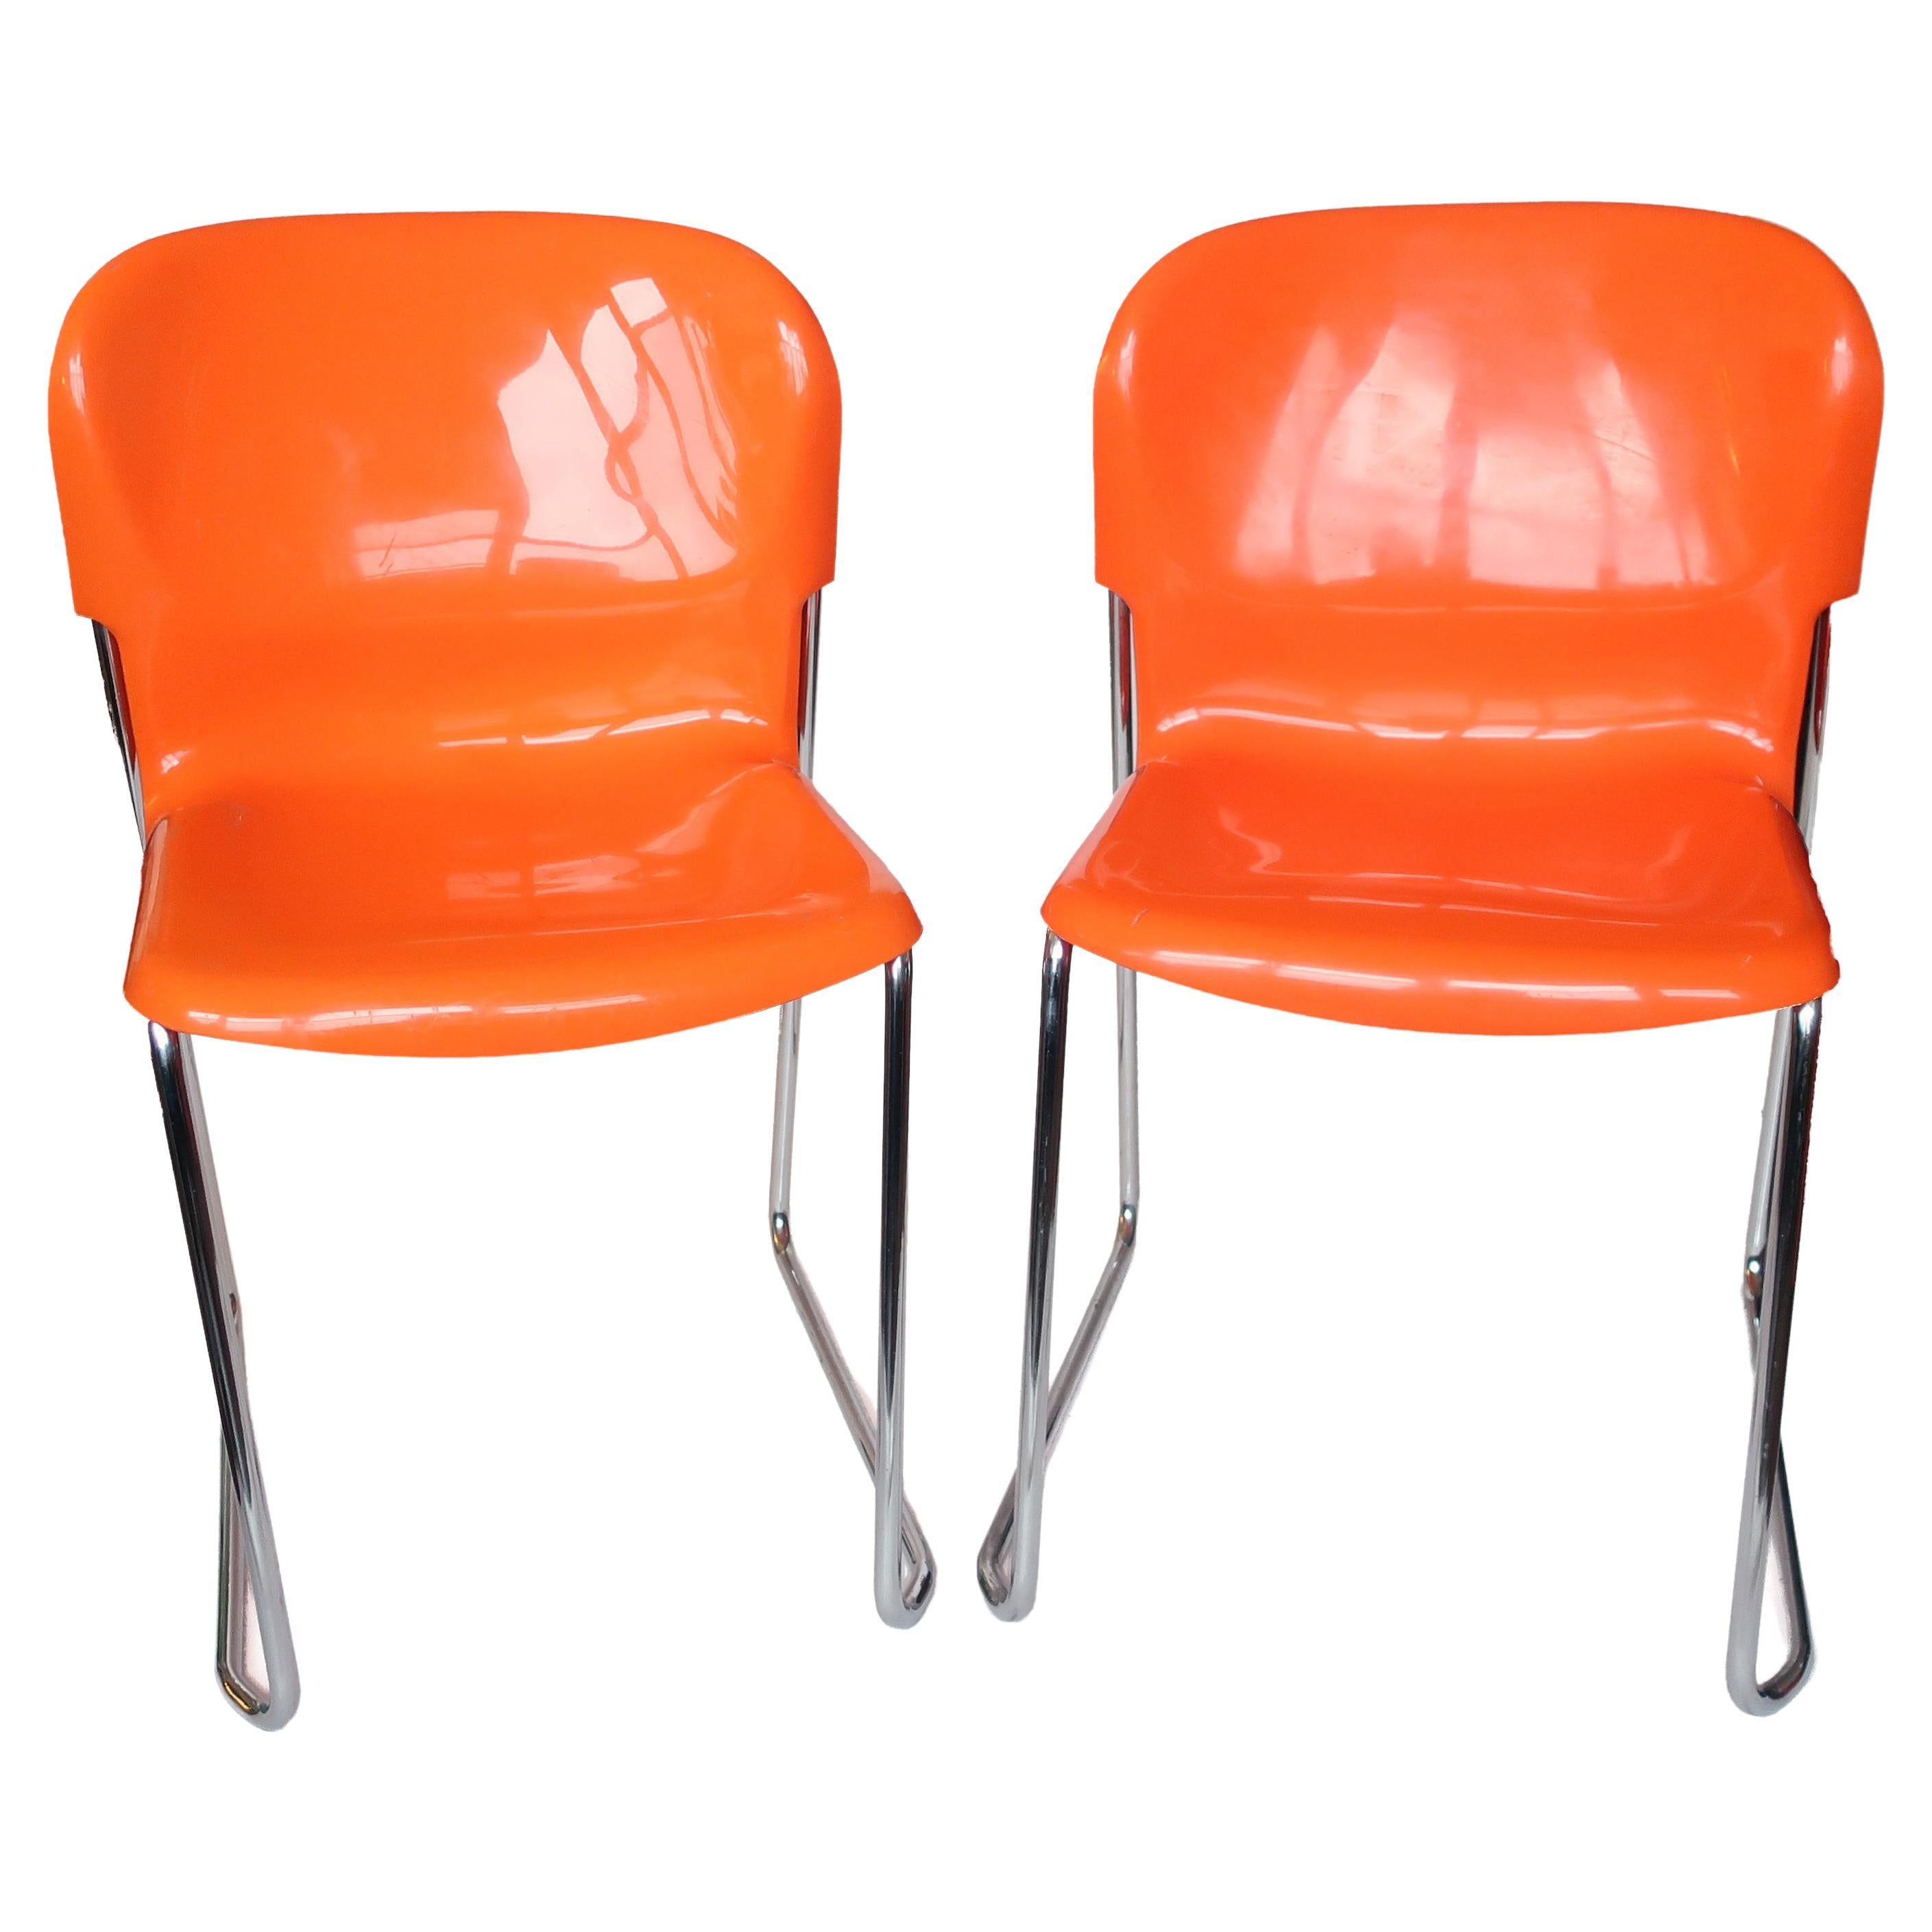 Pair of Orange SM 400 Swing Chairs by Gerd Lange for Drabert For Sale